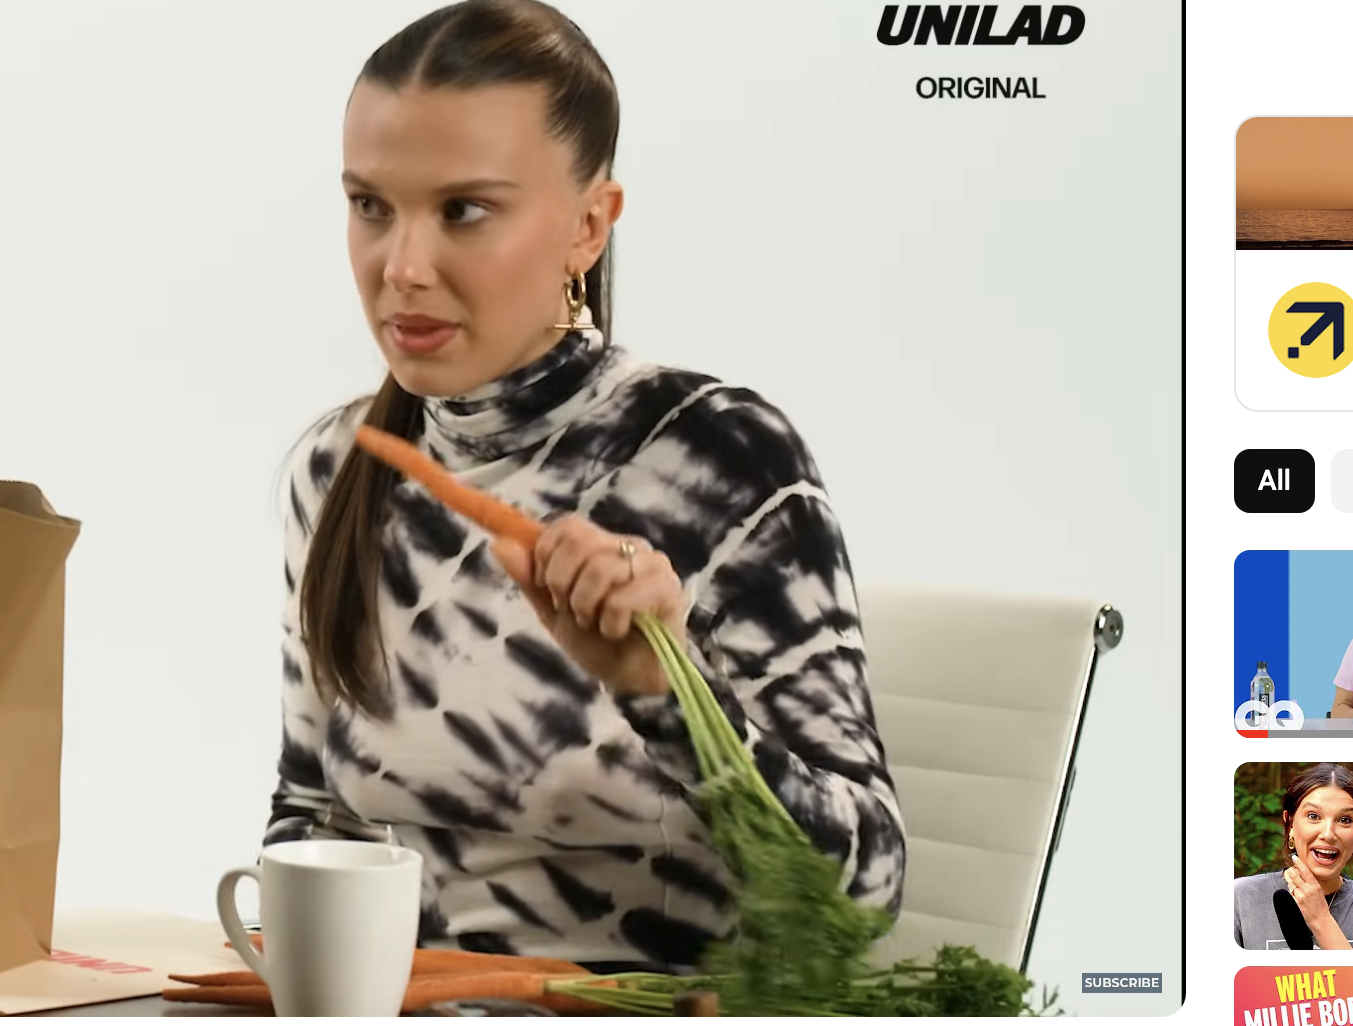 Millie Bobby Brown in a still from a video interview, is seated and holding a carrot with the long stem still attached. On the table in front of her is a paper bag and a mug